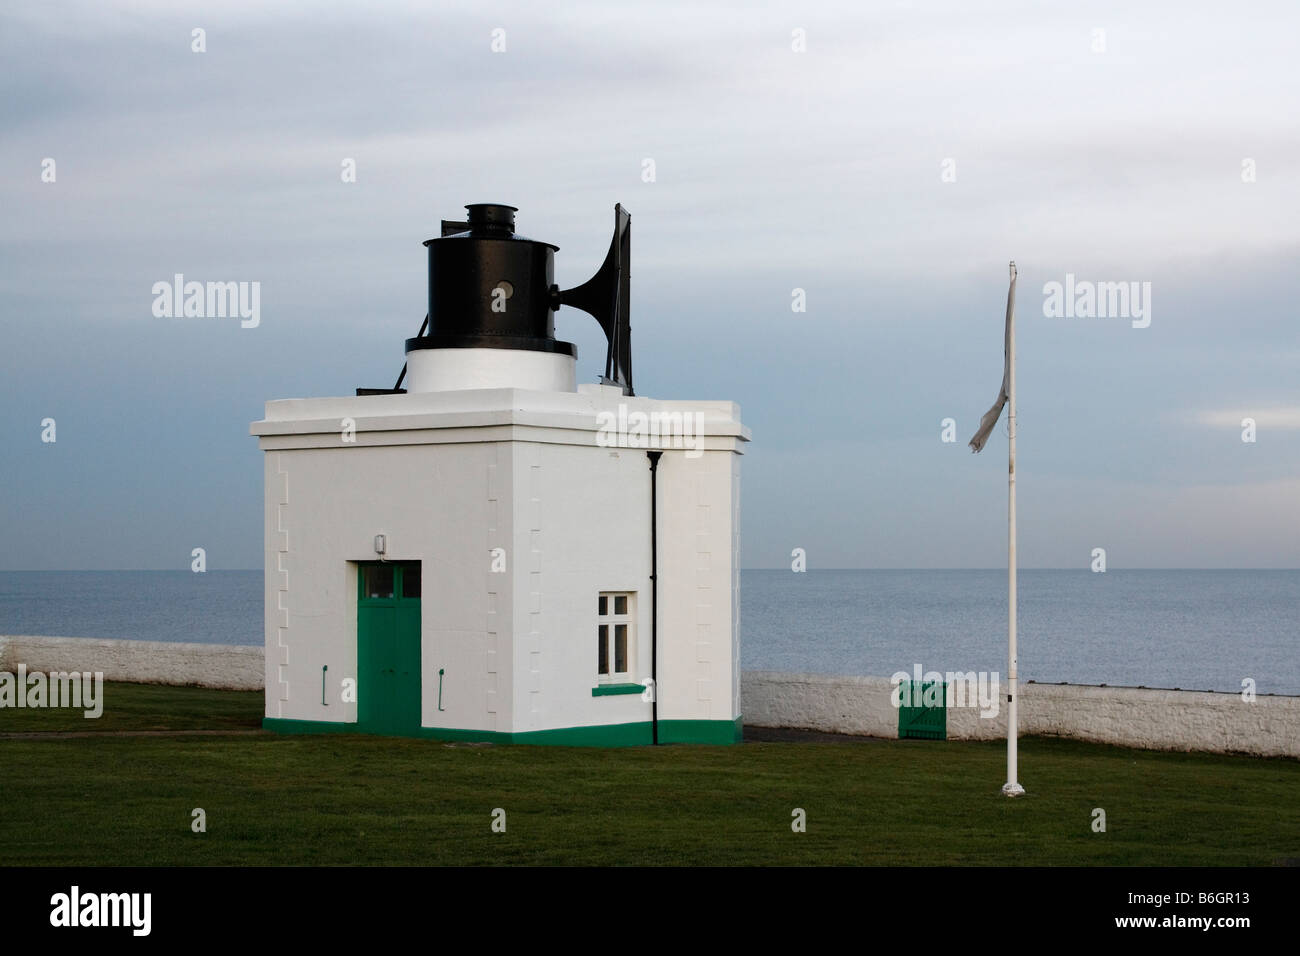 Souter Lighthouse Foghorn Station Lizard Point Marsden Bay between South Shields and Sunderland Tyne and Wear North East England Stock Photo